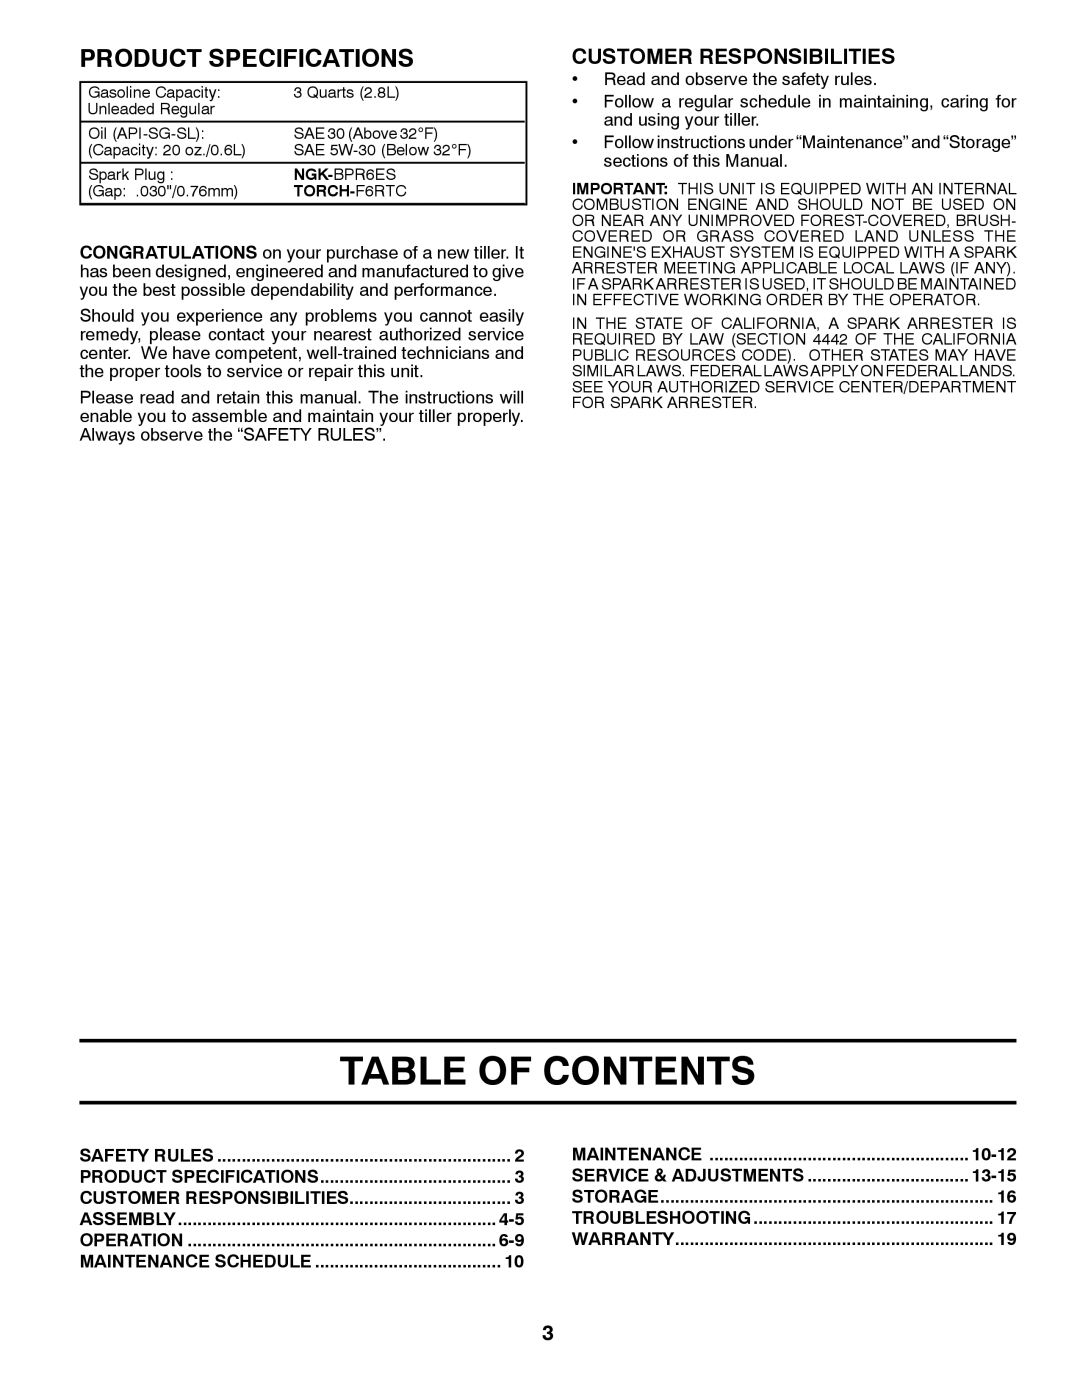 Poulan 96082001300, 427896 manual Table Of Contents, Product Specifications, Customer Responsibilities, 10-12, 13-15 